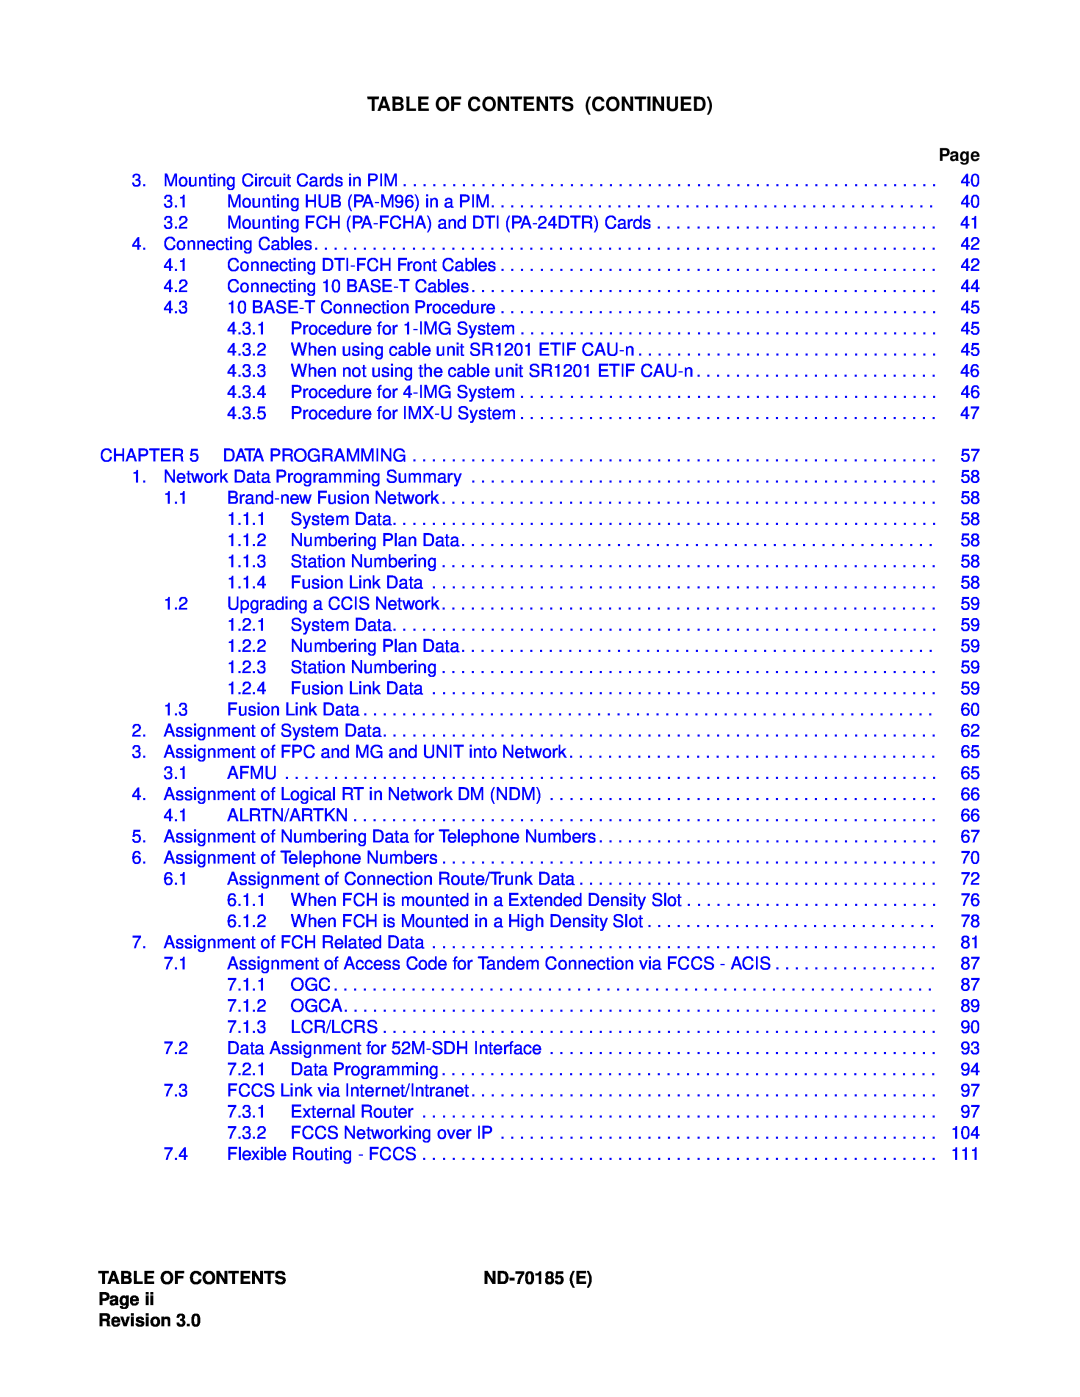 NEC NEAX2400 system manual Table Of Contents Continued, ND-70185E, Page Revision 